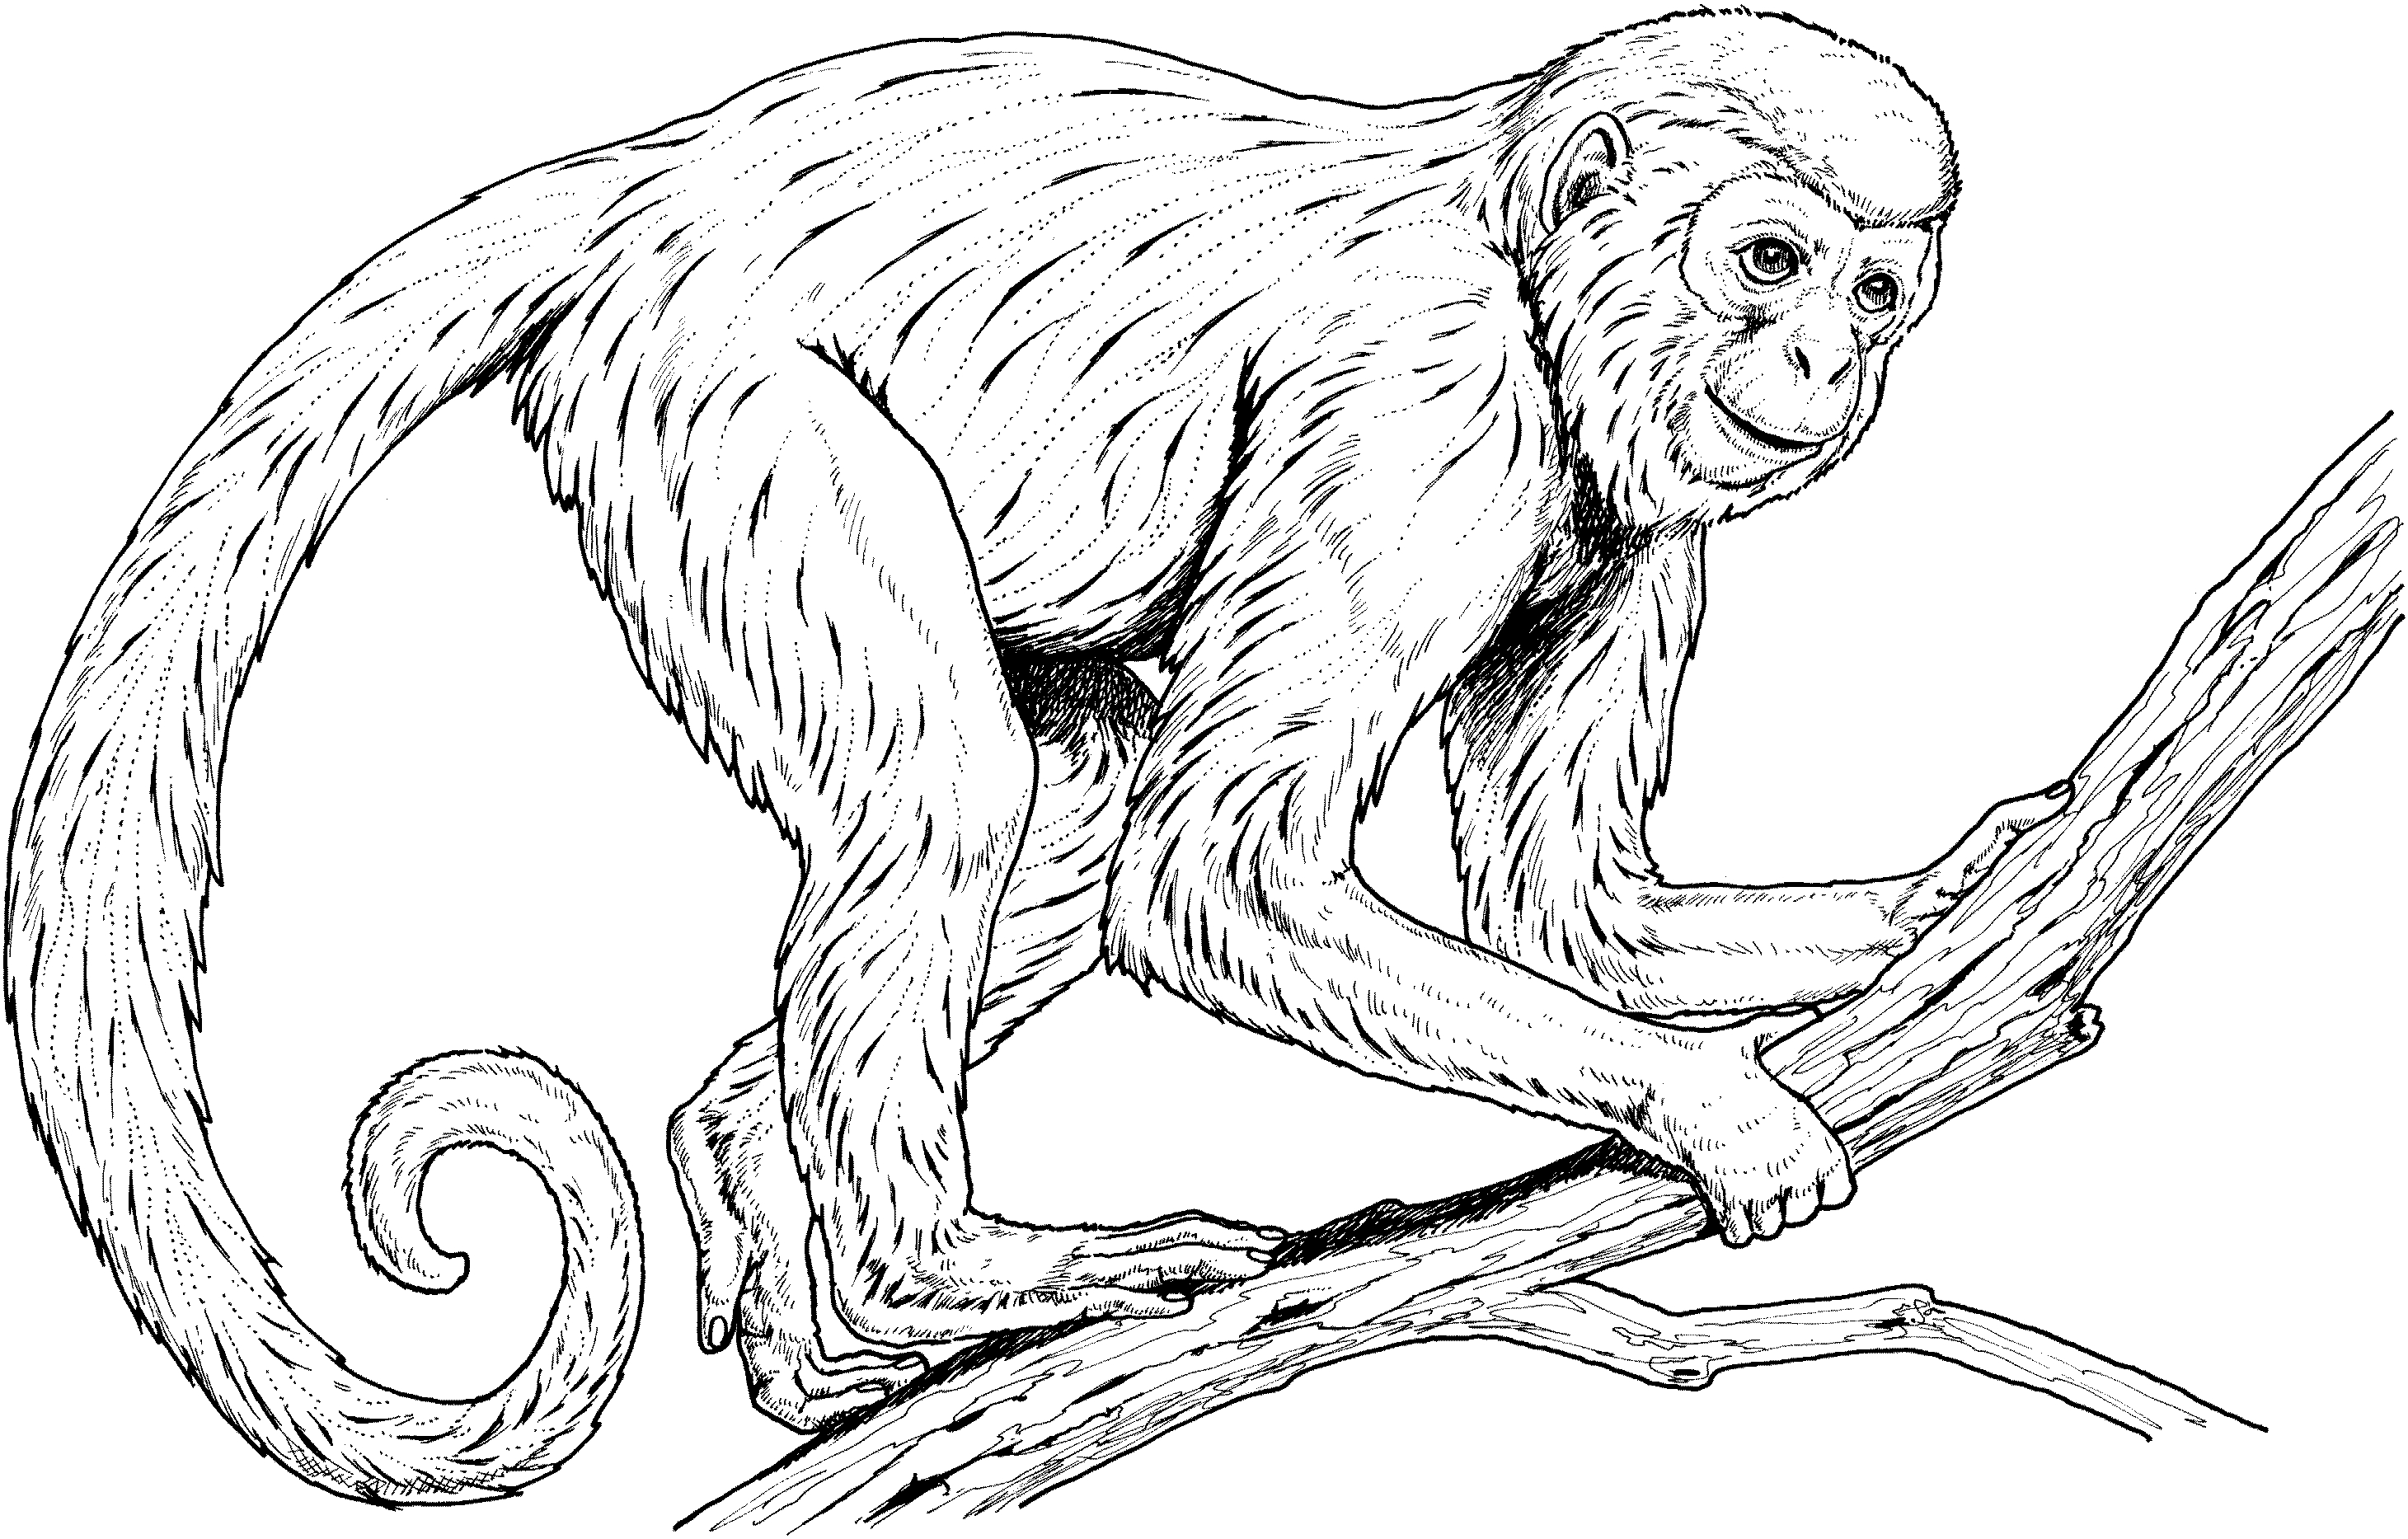 Spider Monkey coloring #18, Download drawings